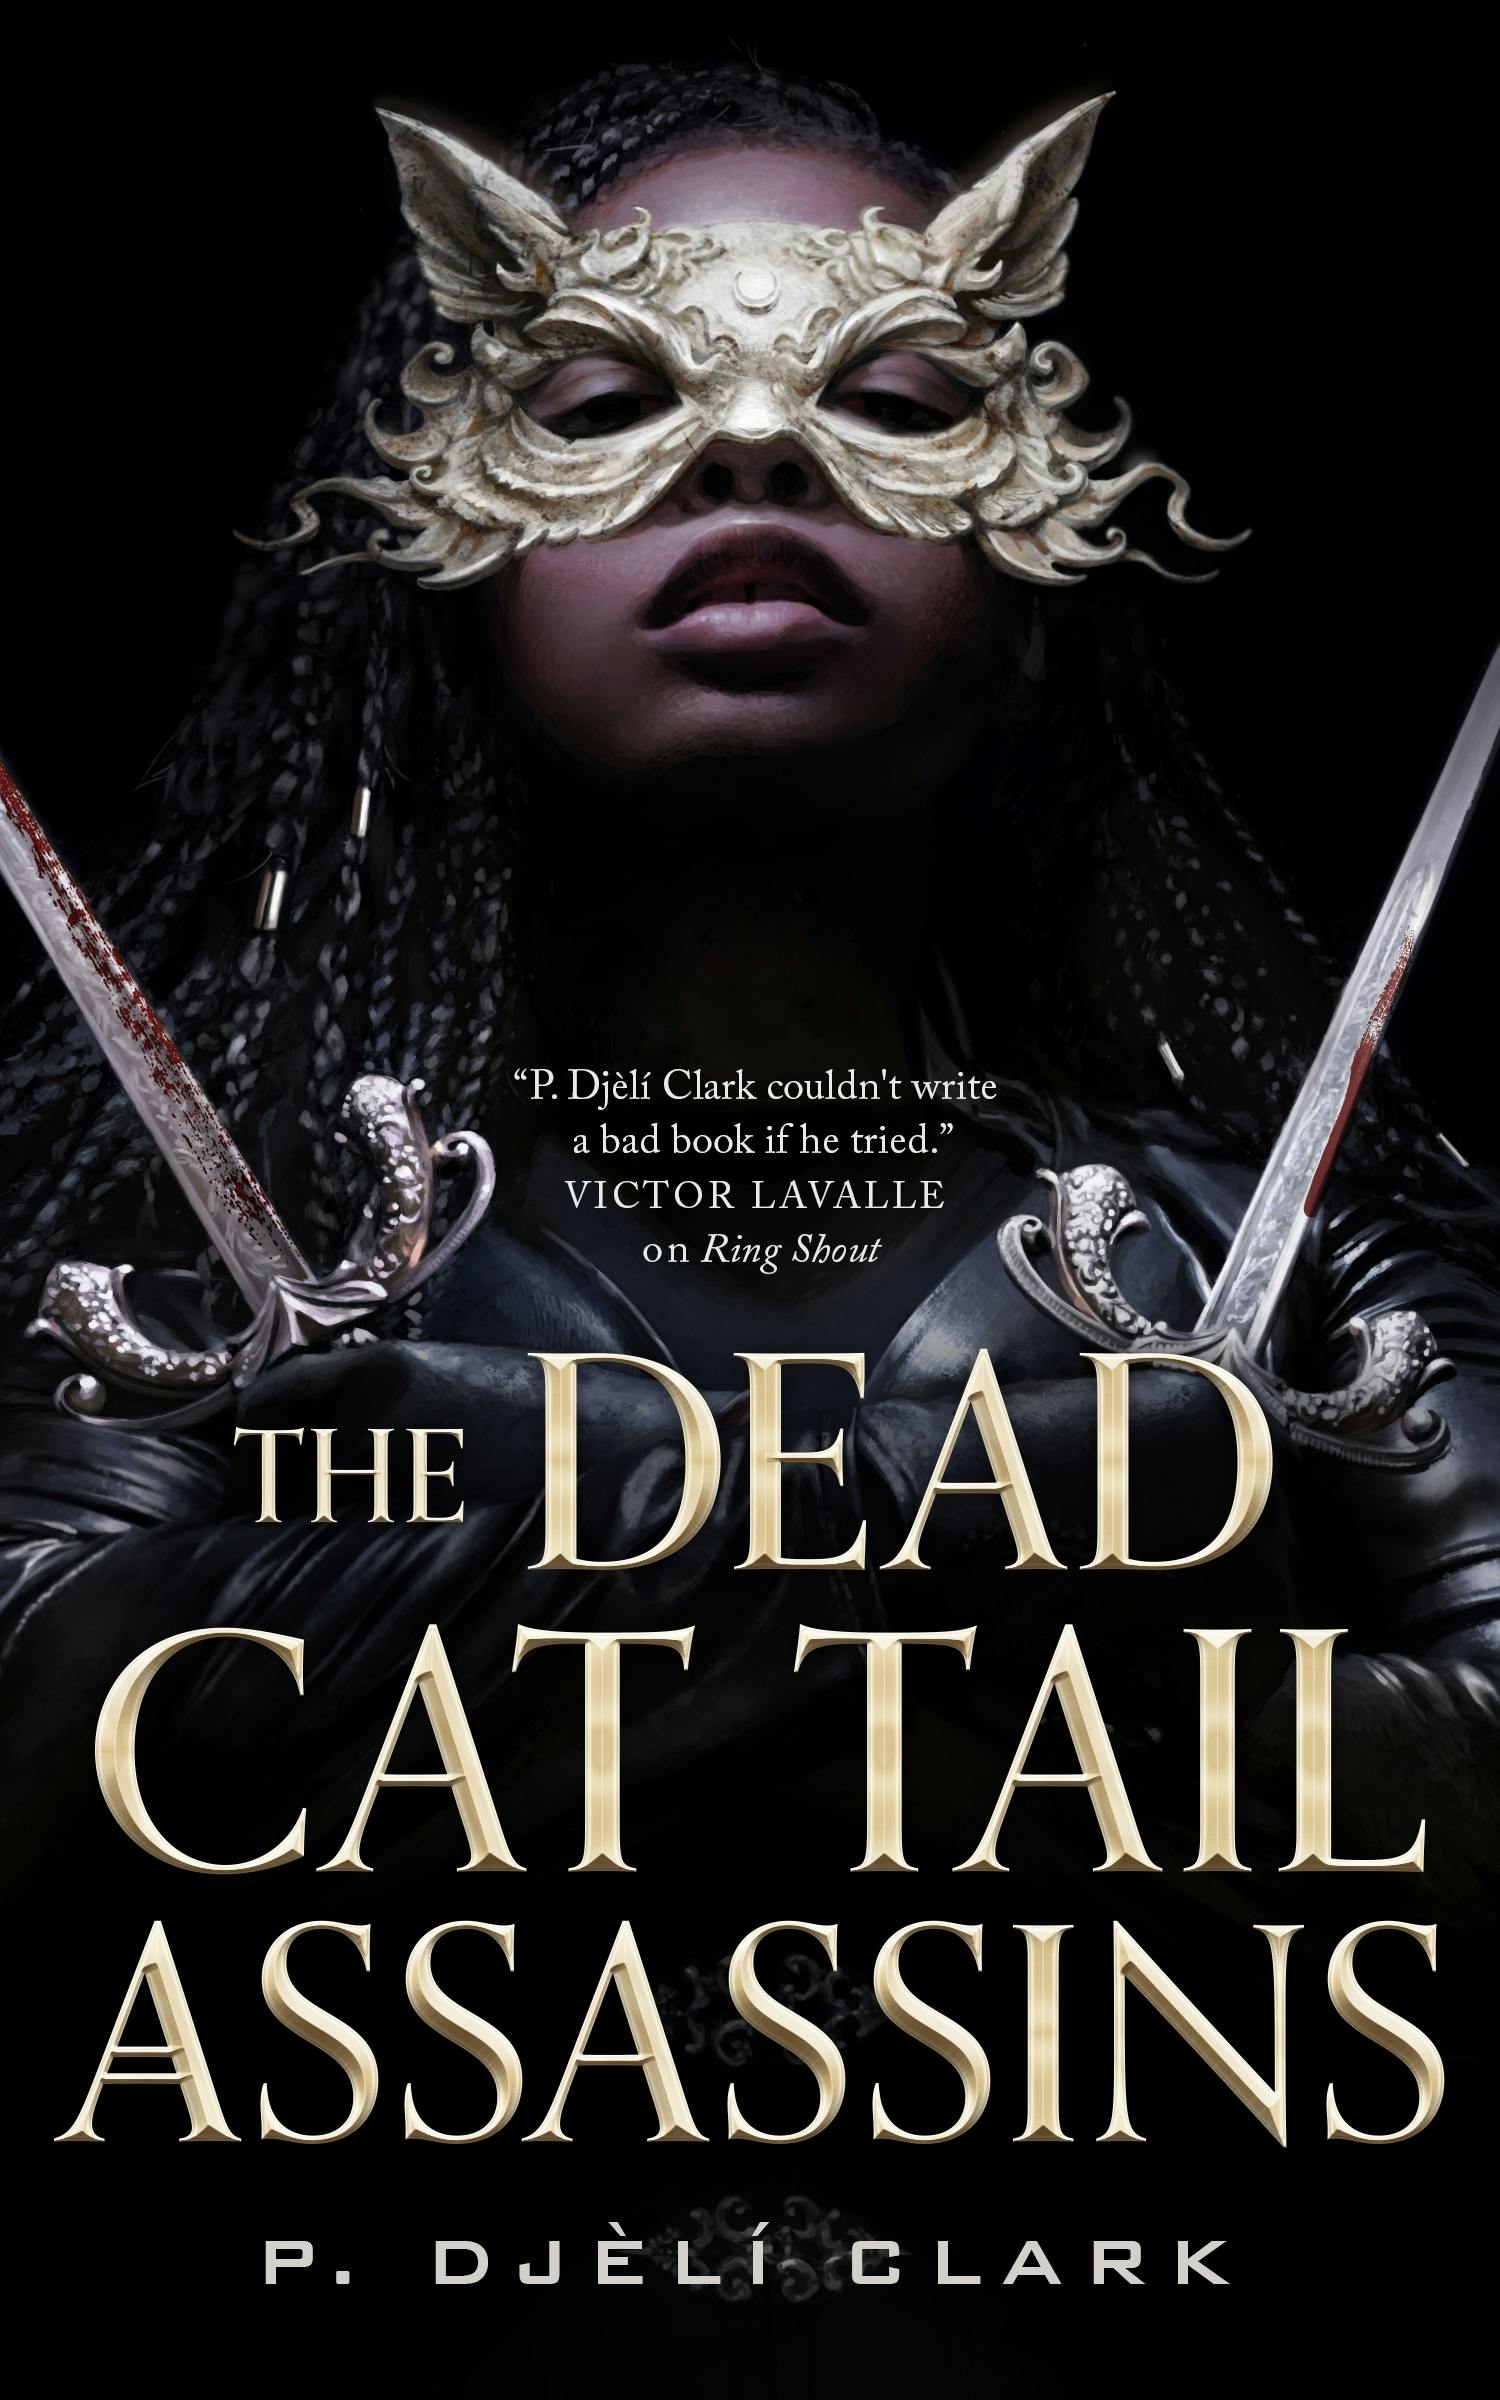 Cover for the book titled as: The Dead Cat Tail Assassins